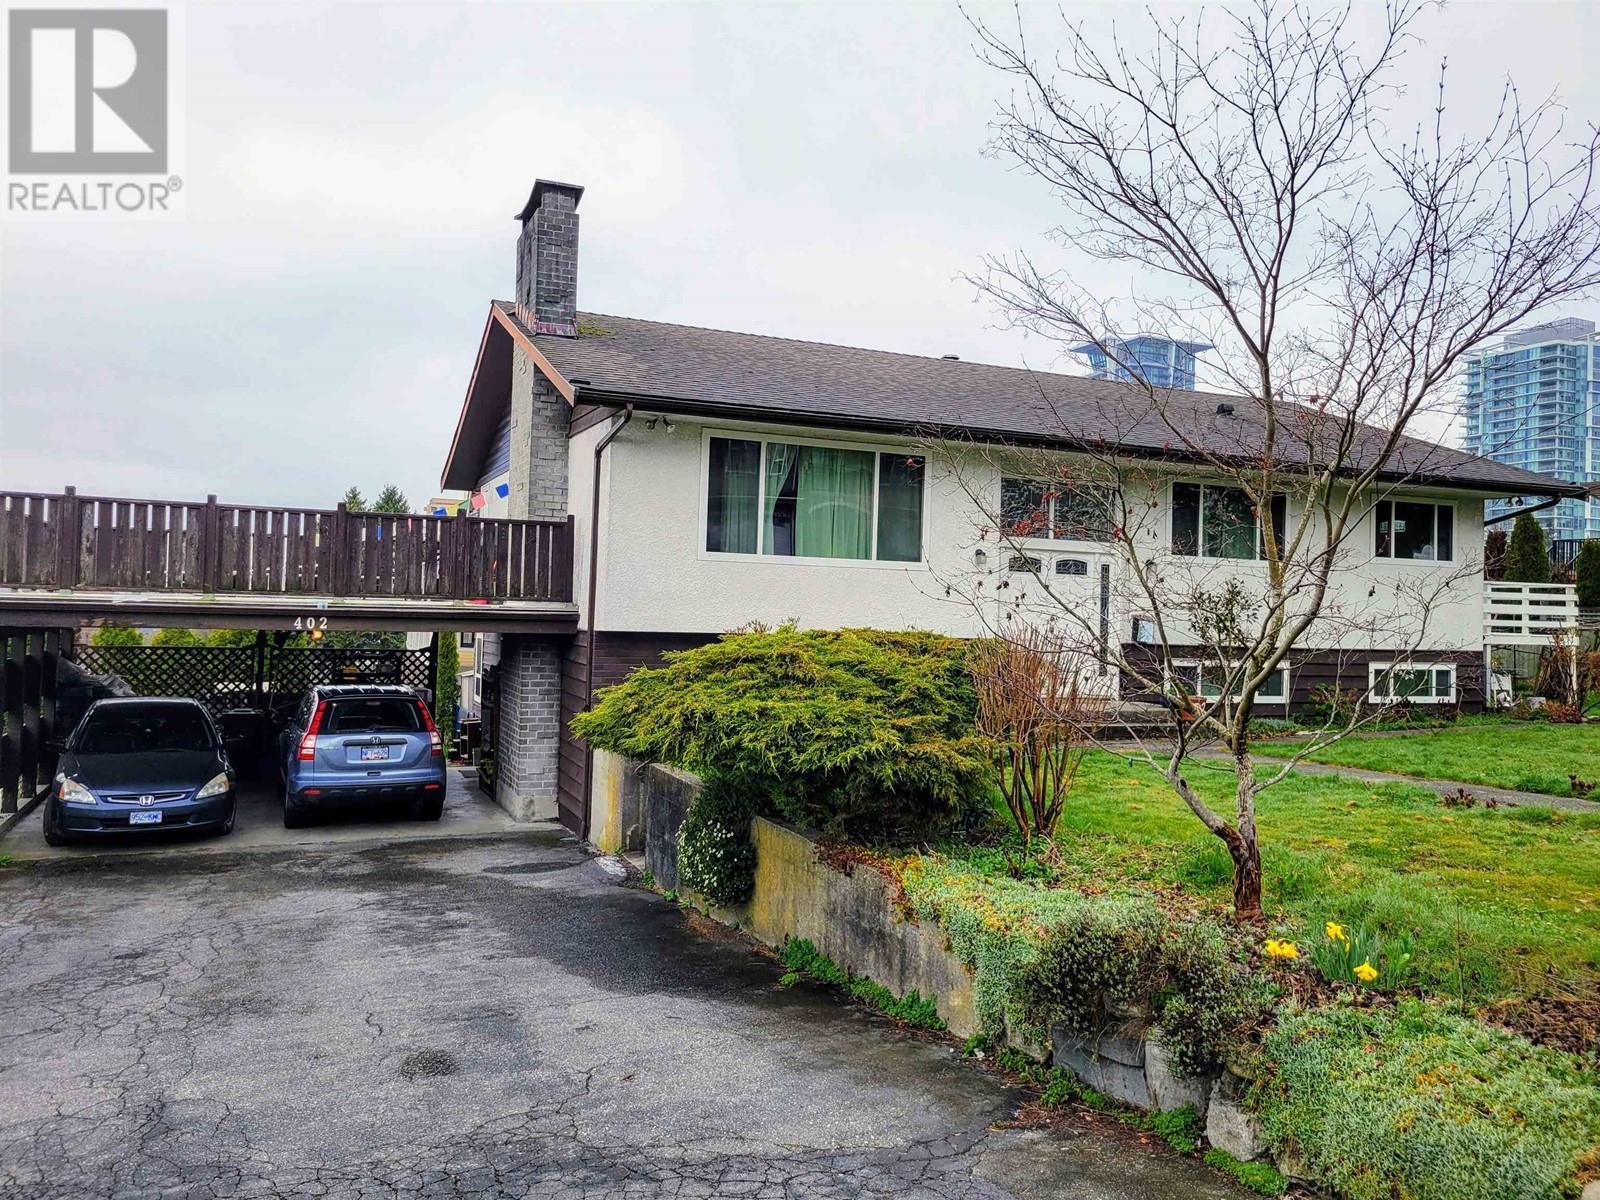 












402 GUILBY STREET

,
Coquitlam,




British Columbia
V3K3Y7

